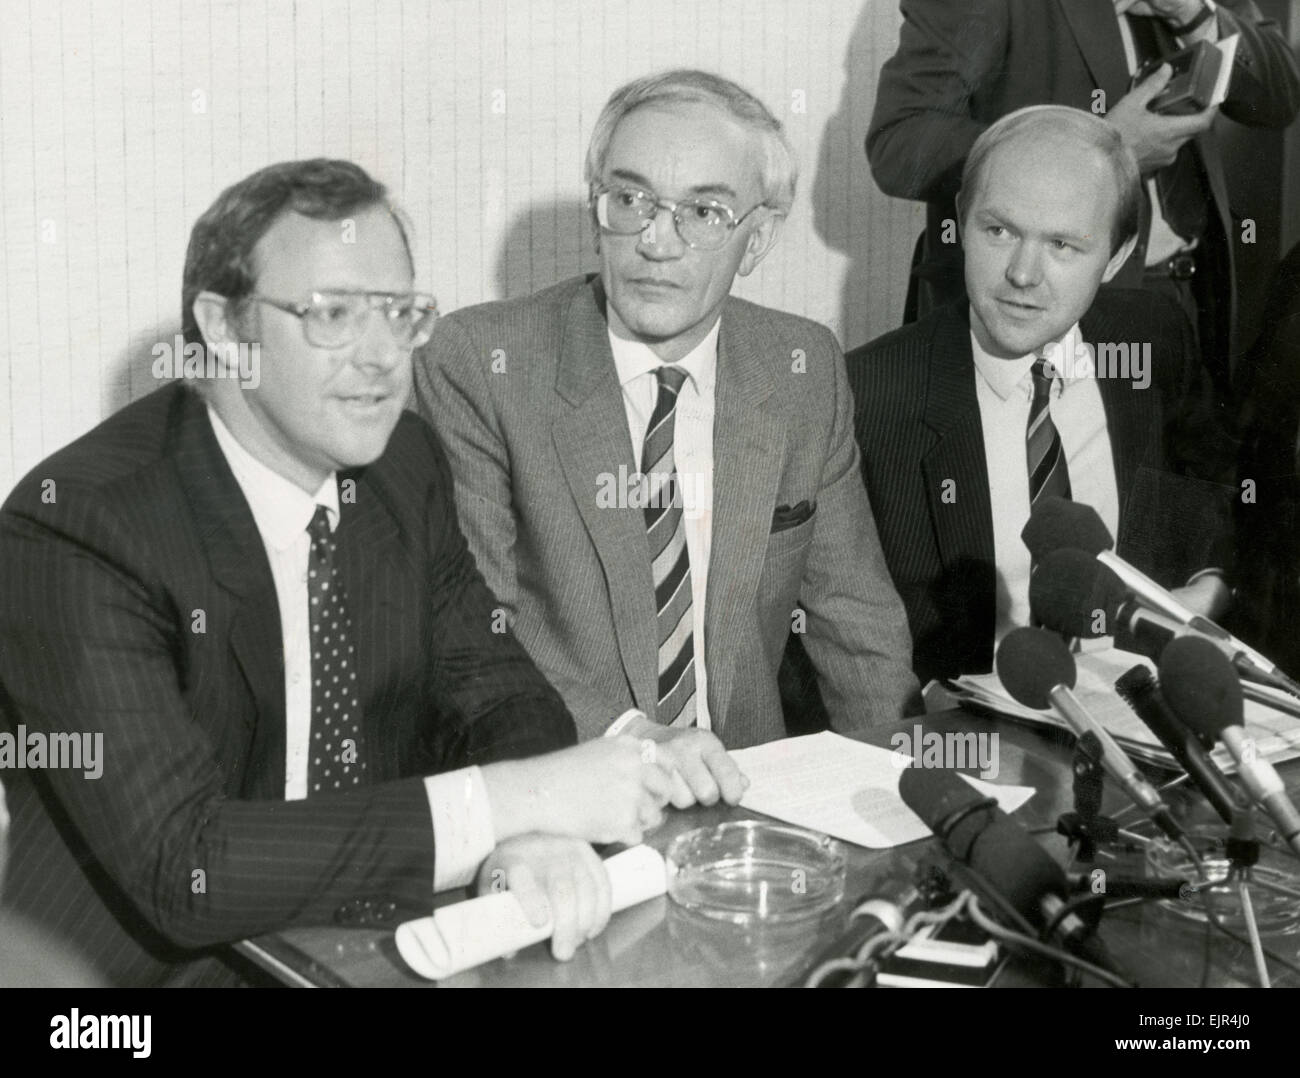 Manchester deputy police chief John Stalker, head of the Stalker inquiry, an investigation into the shootings of a number of memebers of the Provisional Irish Republican Army, photographed with his lawyers at a press conference. He was temporarily suspended from duty and removed from the inquiry after allegations were made against him, which were later proven to be false. 25th June 1986. Stock Photo